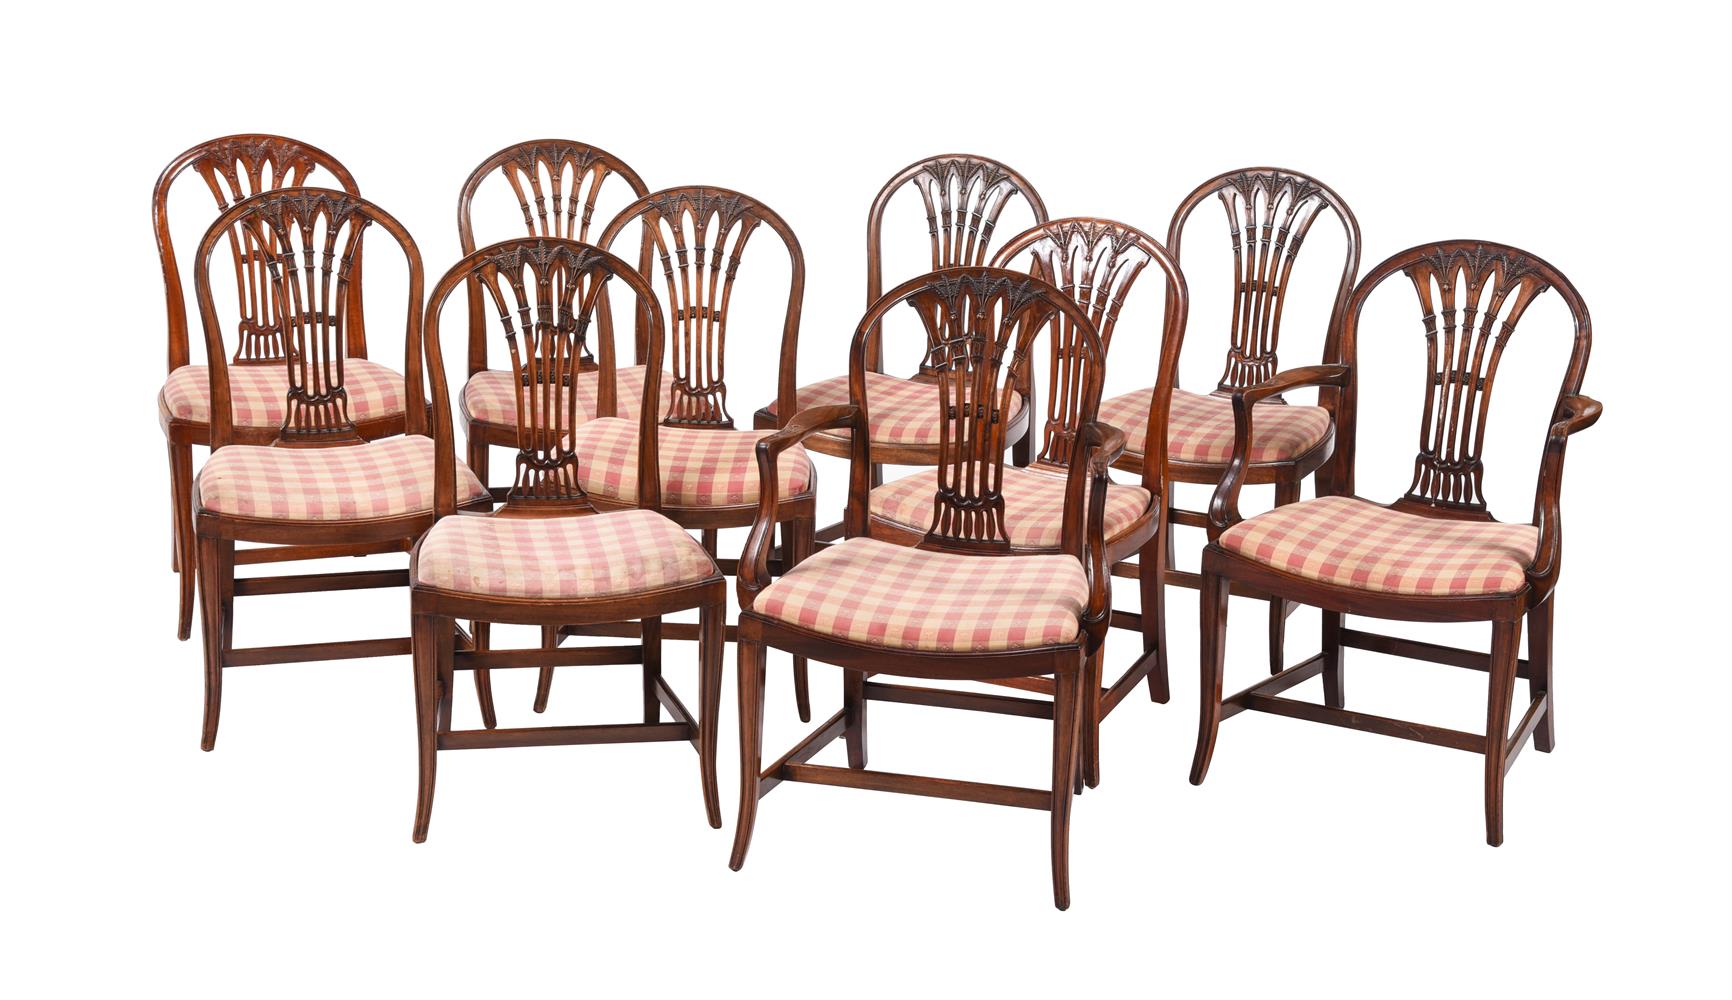 A HARLEQUIN SET OF TEN MAHOGANY DINING CHAIRS IN GEORGE III STYLE